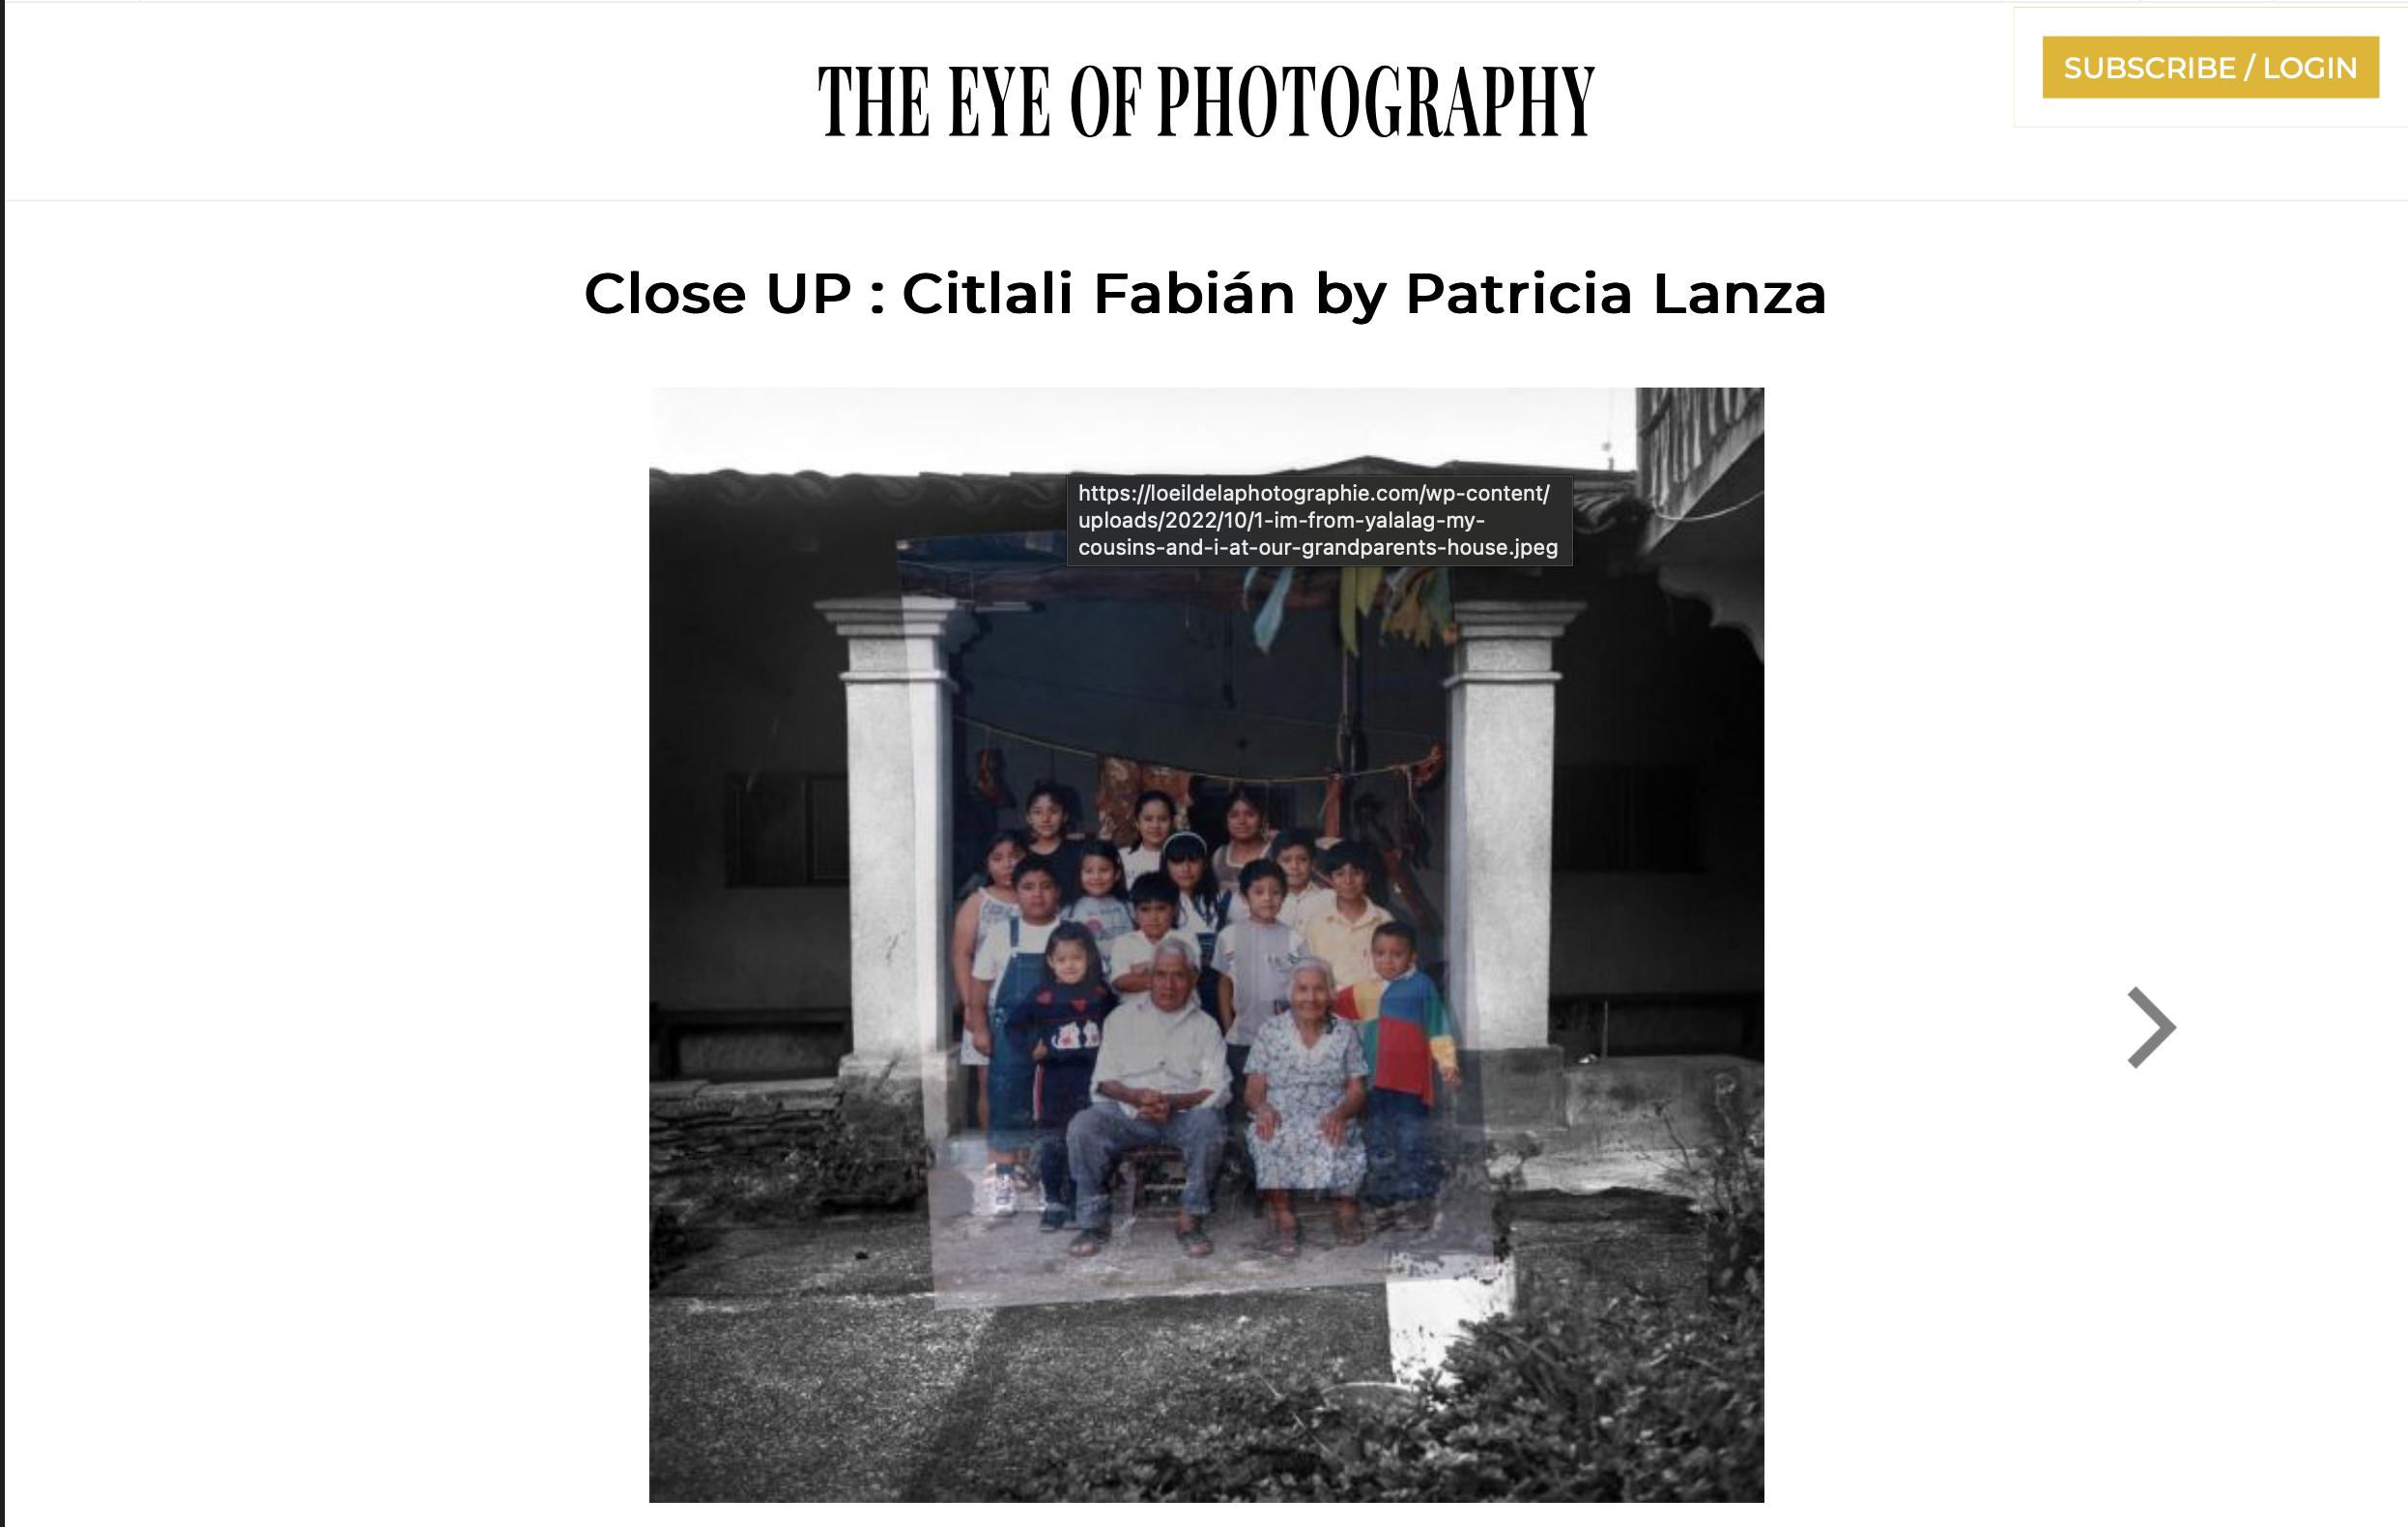 Interview with Patricia Lanza for The Eye of Photography